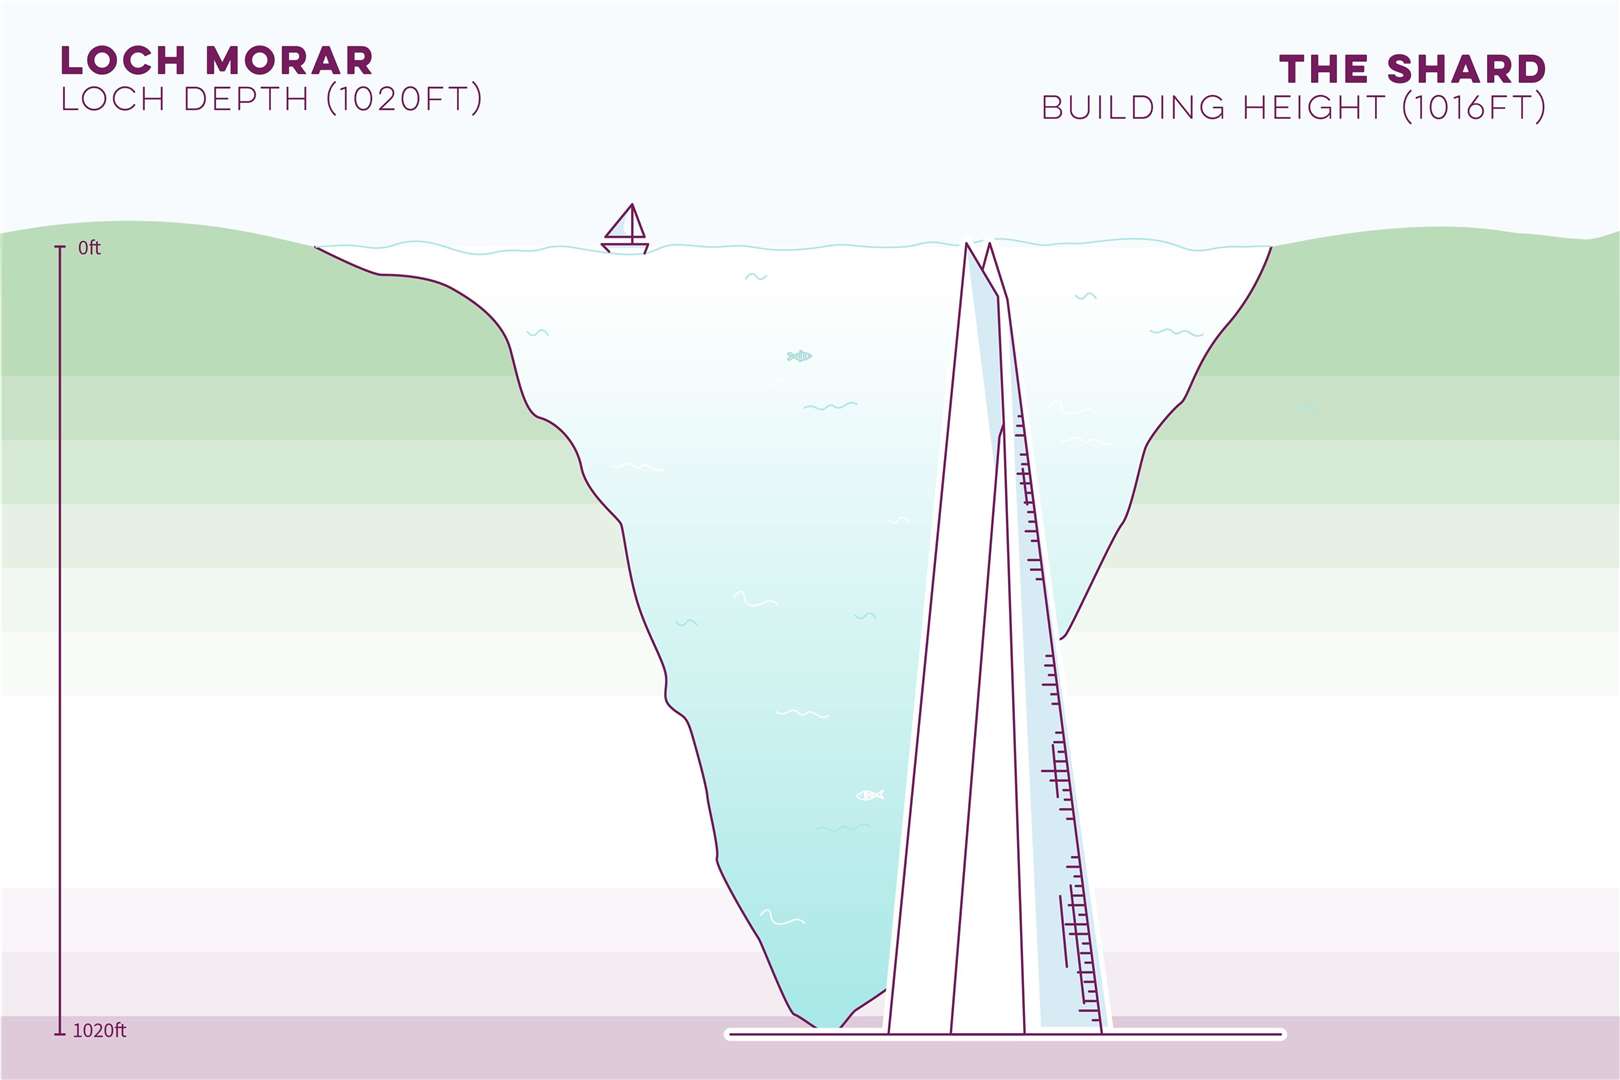 The UK’s tallest building: The Shard in London, is the same height as the depth of Loch Morar.